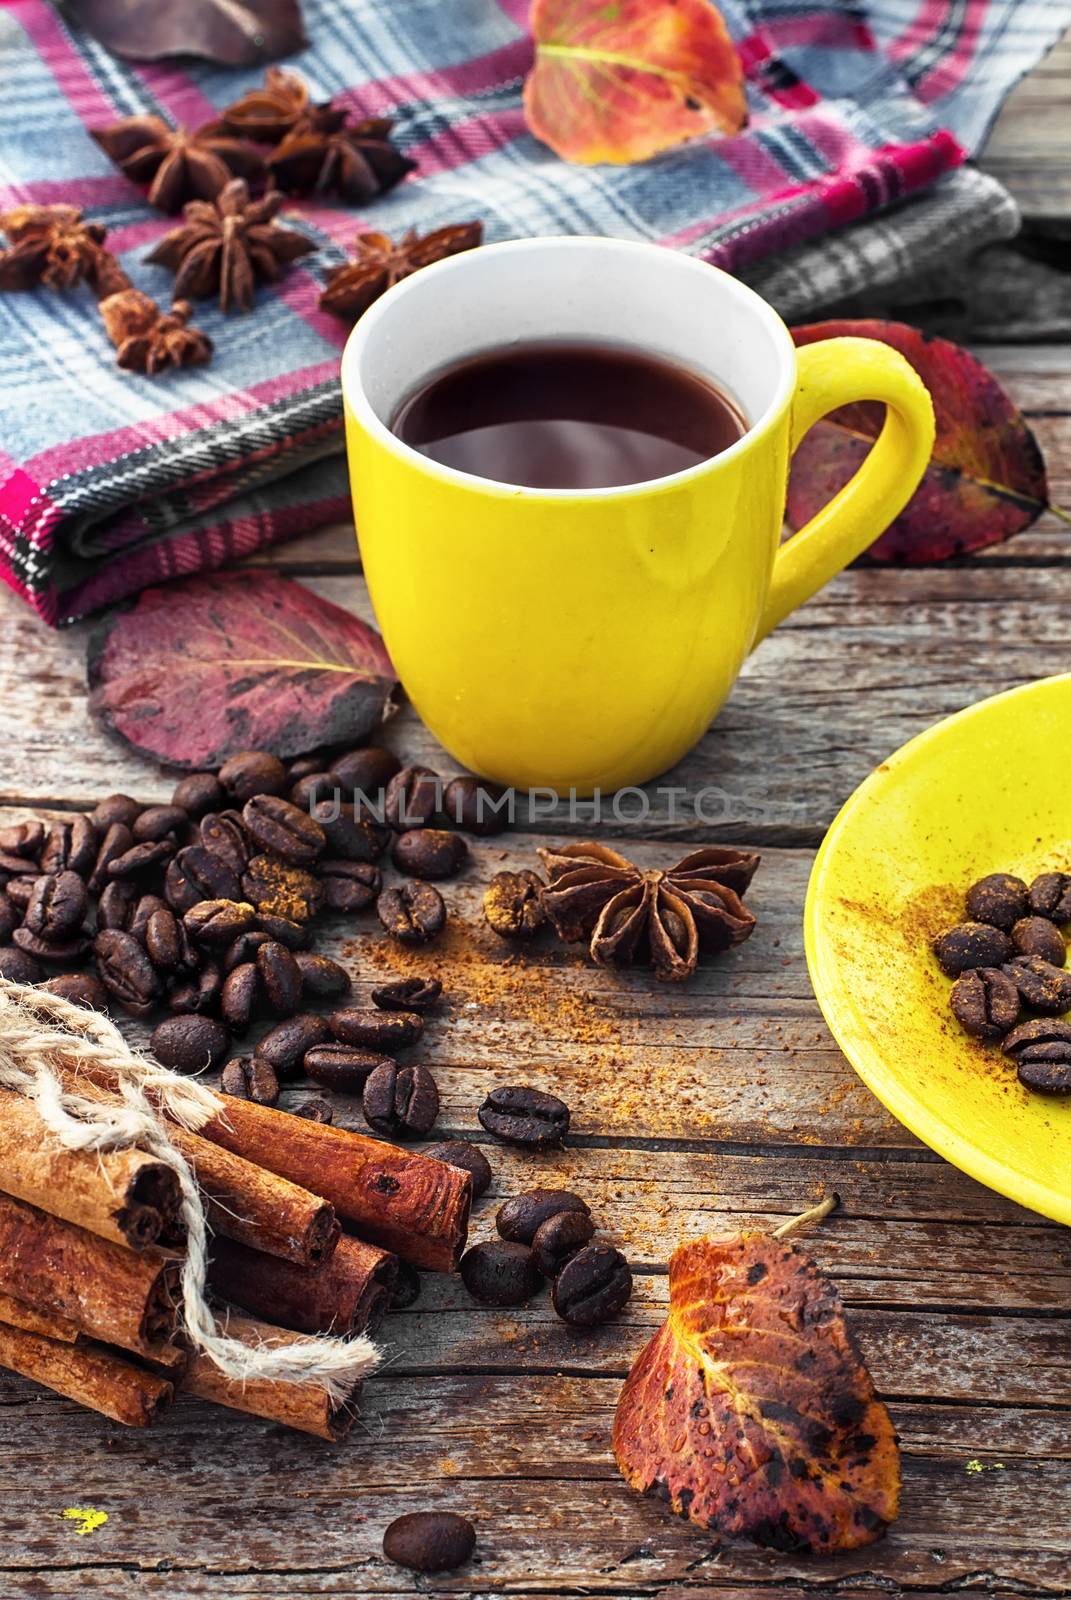 Coffee in the fall by LMykola